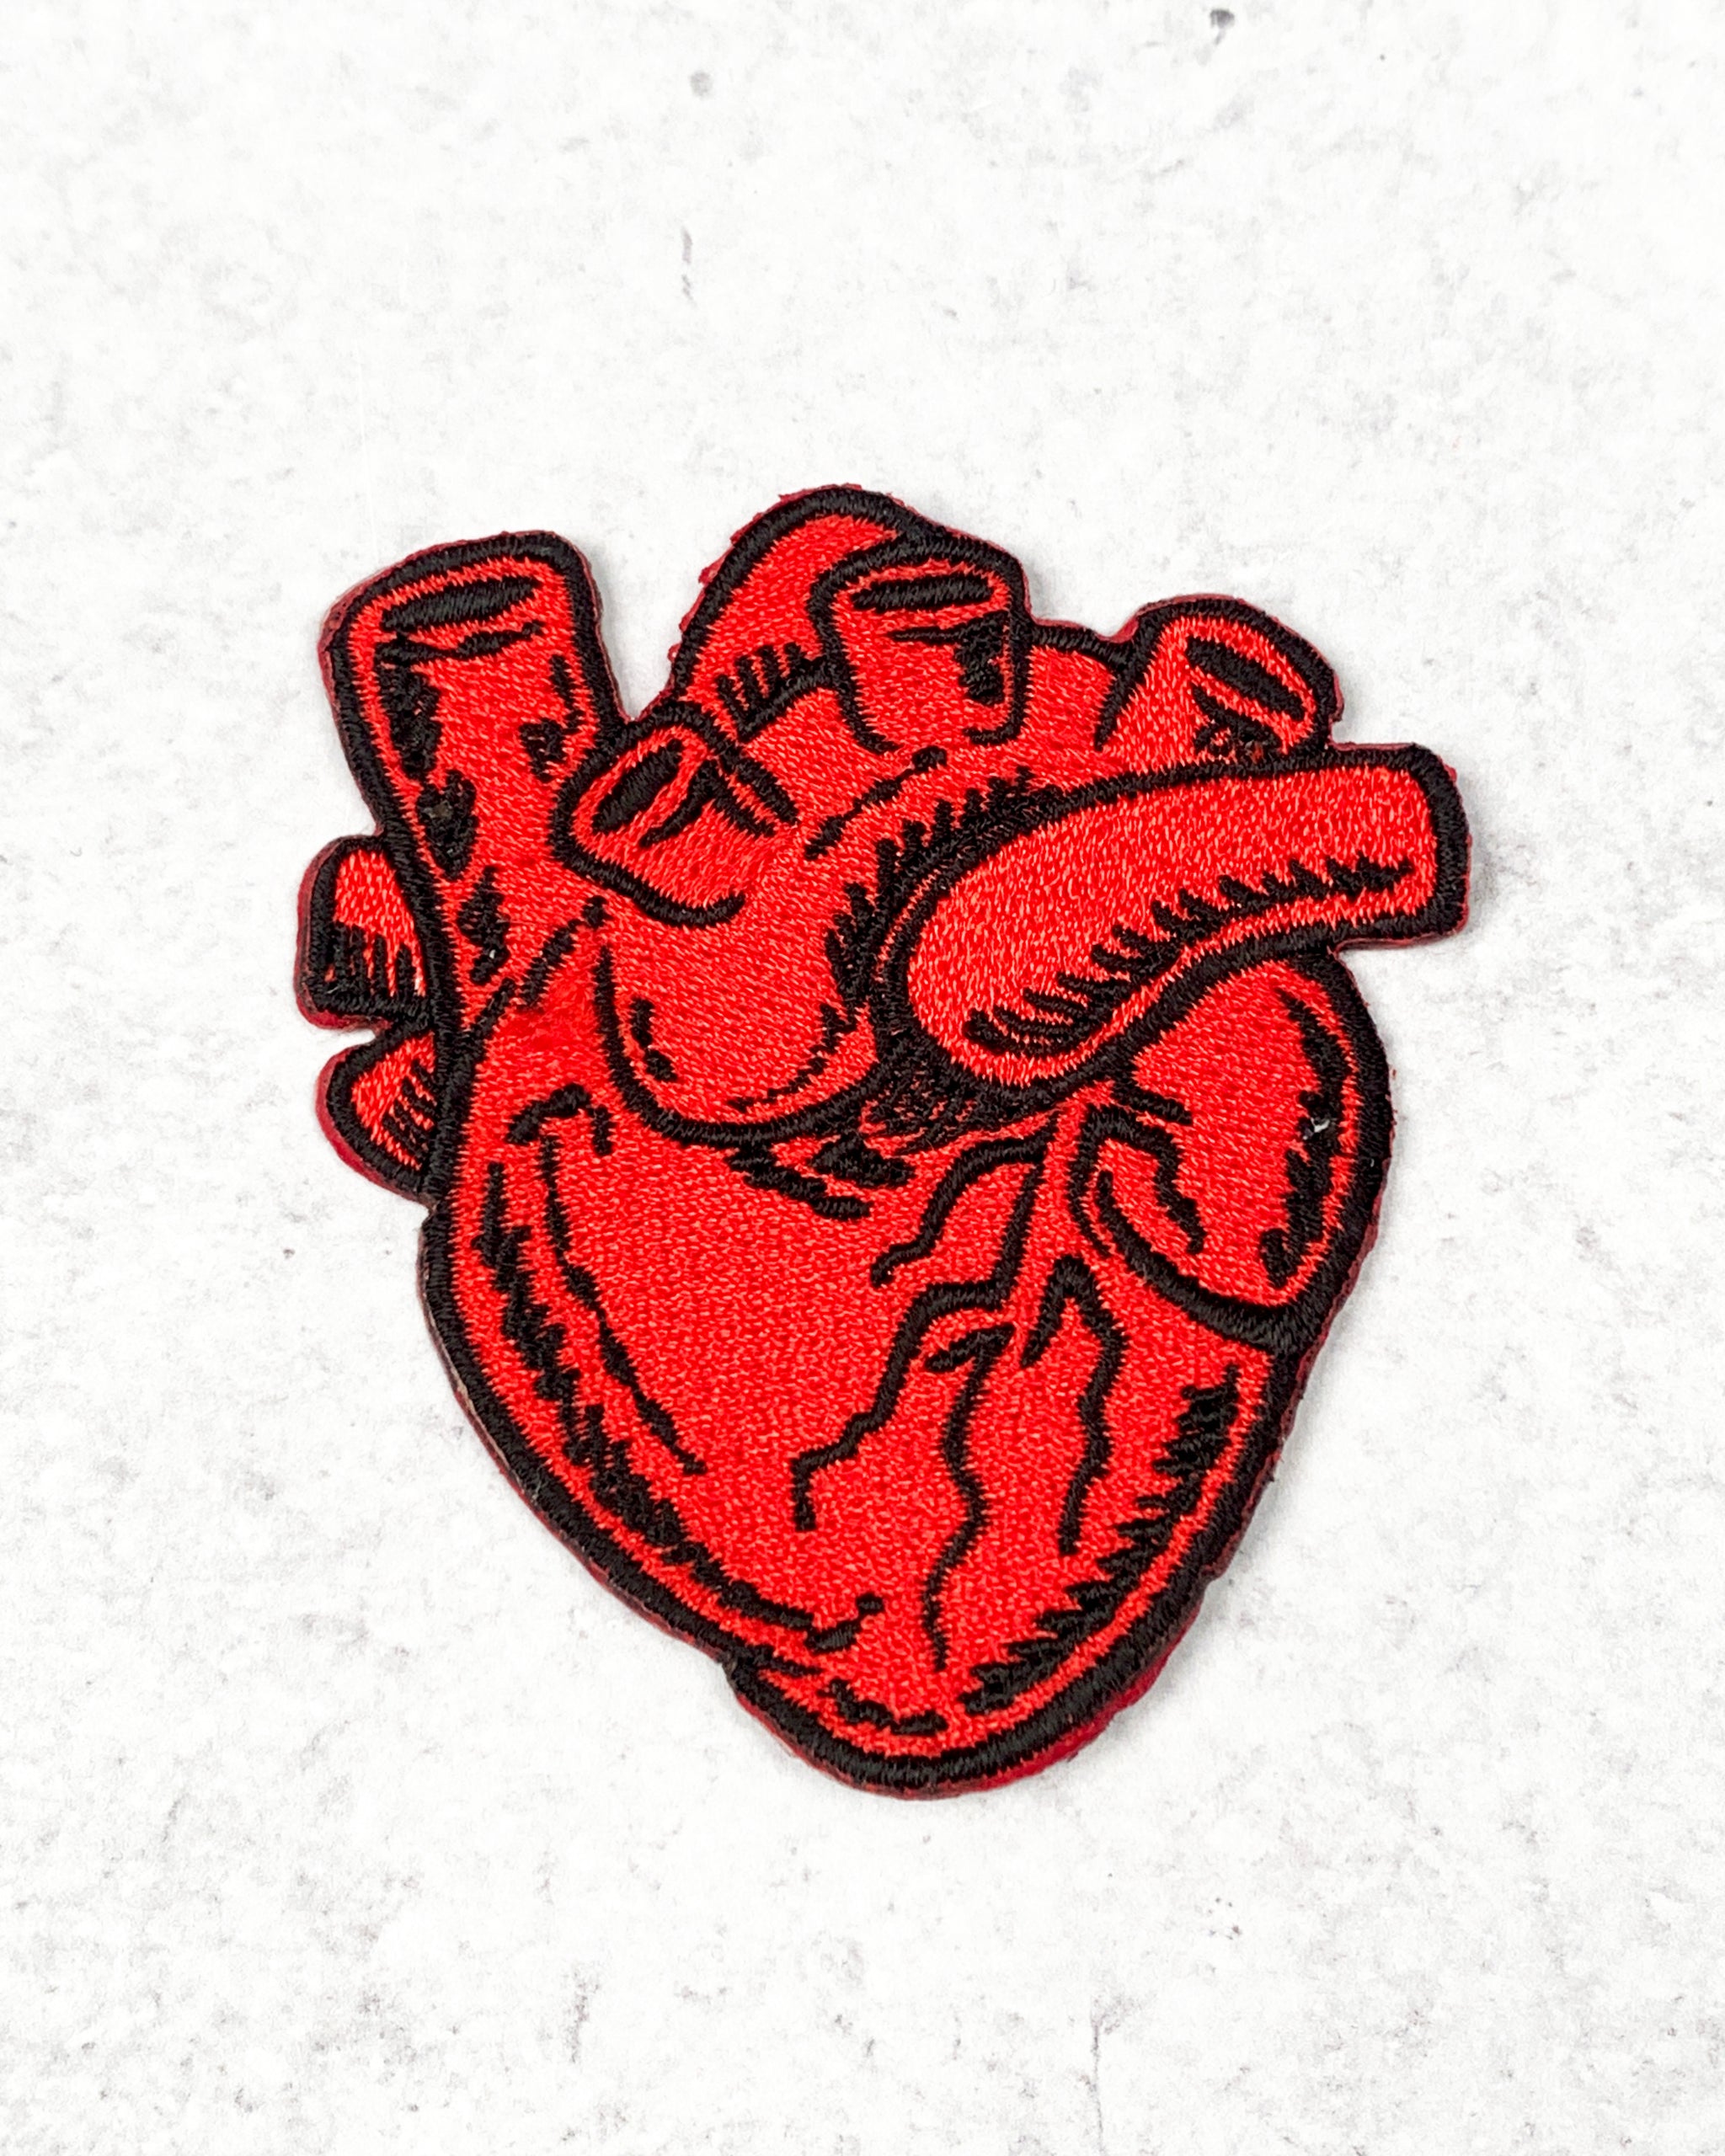 Patch HEART - iron-on patches heart / application HEART / patches / patches  / colorful mix / sewing patches